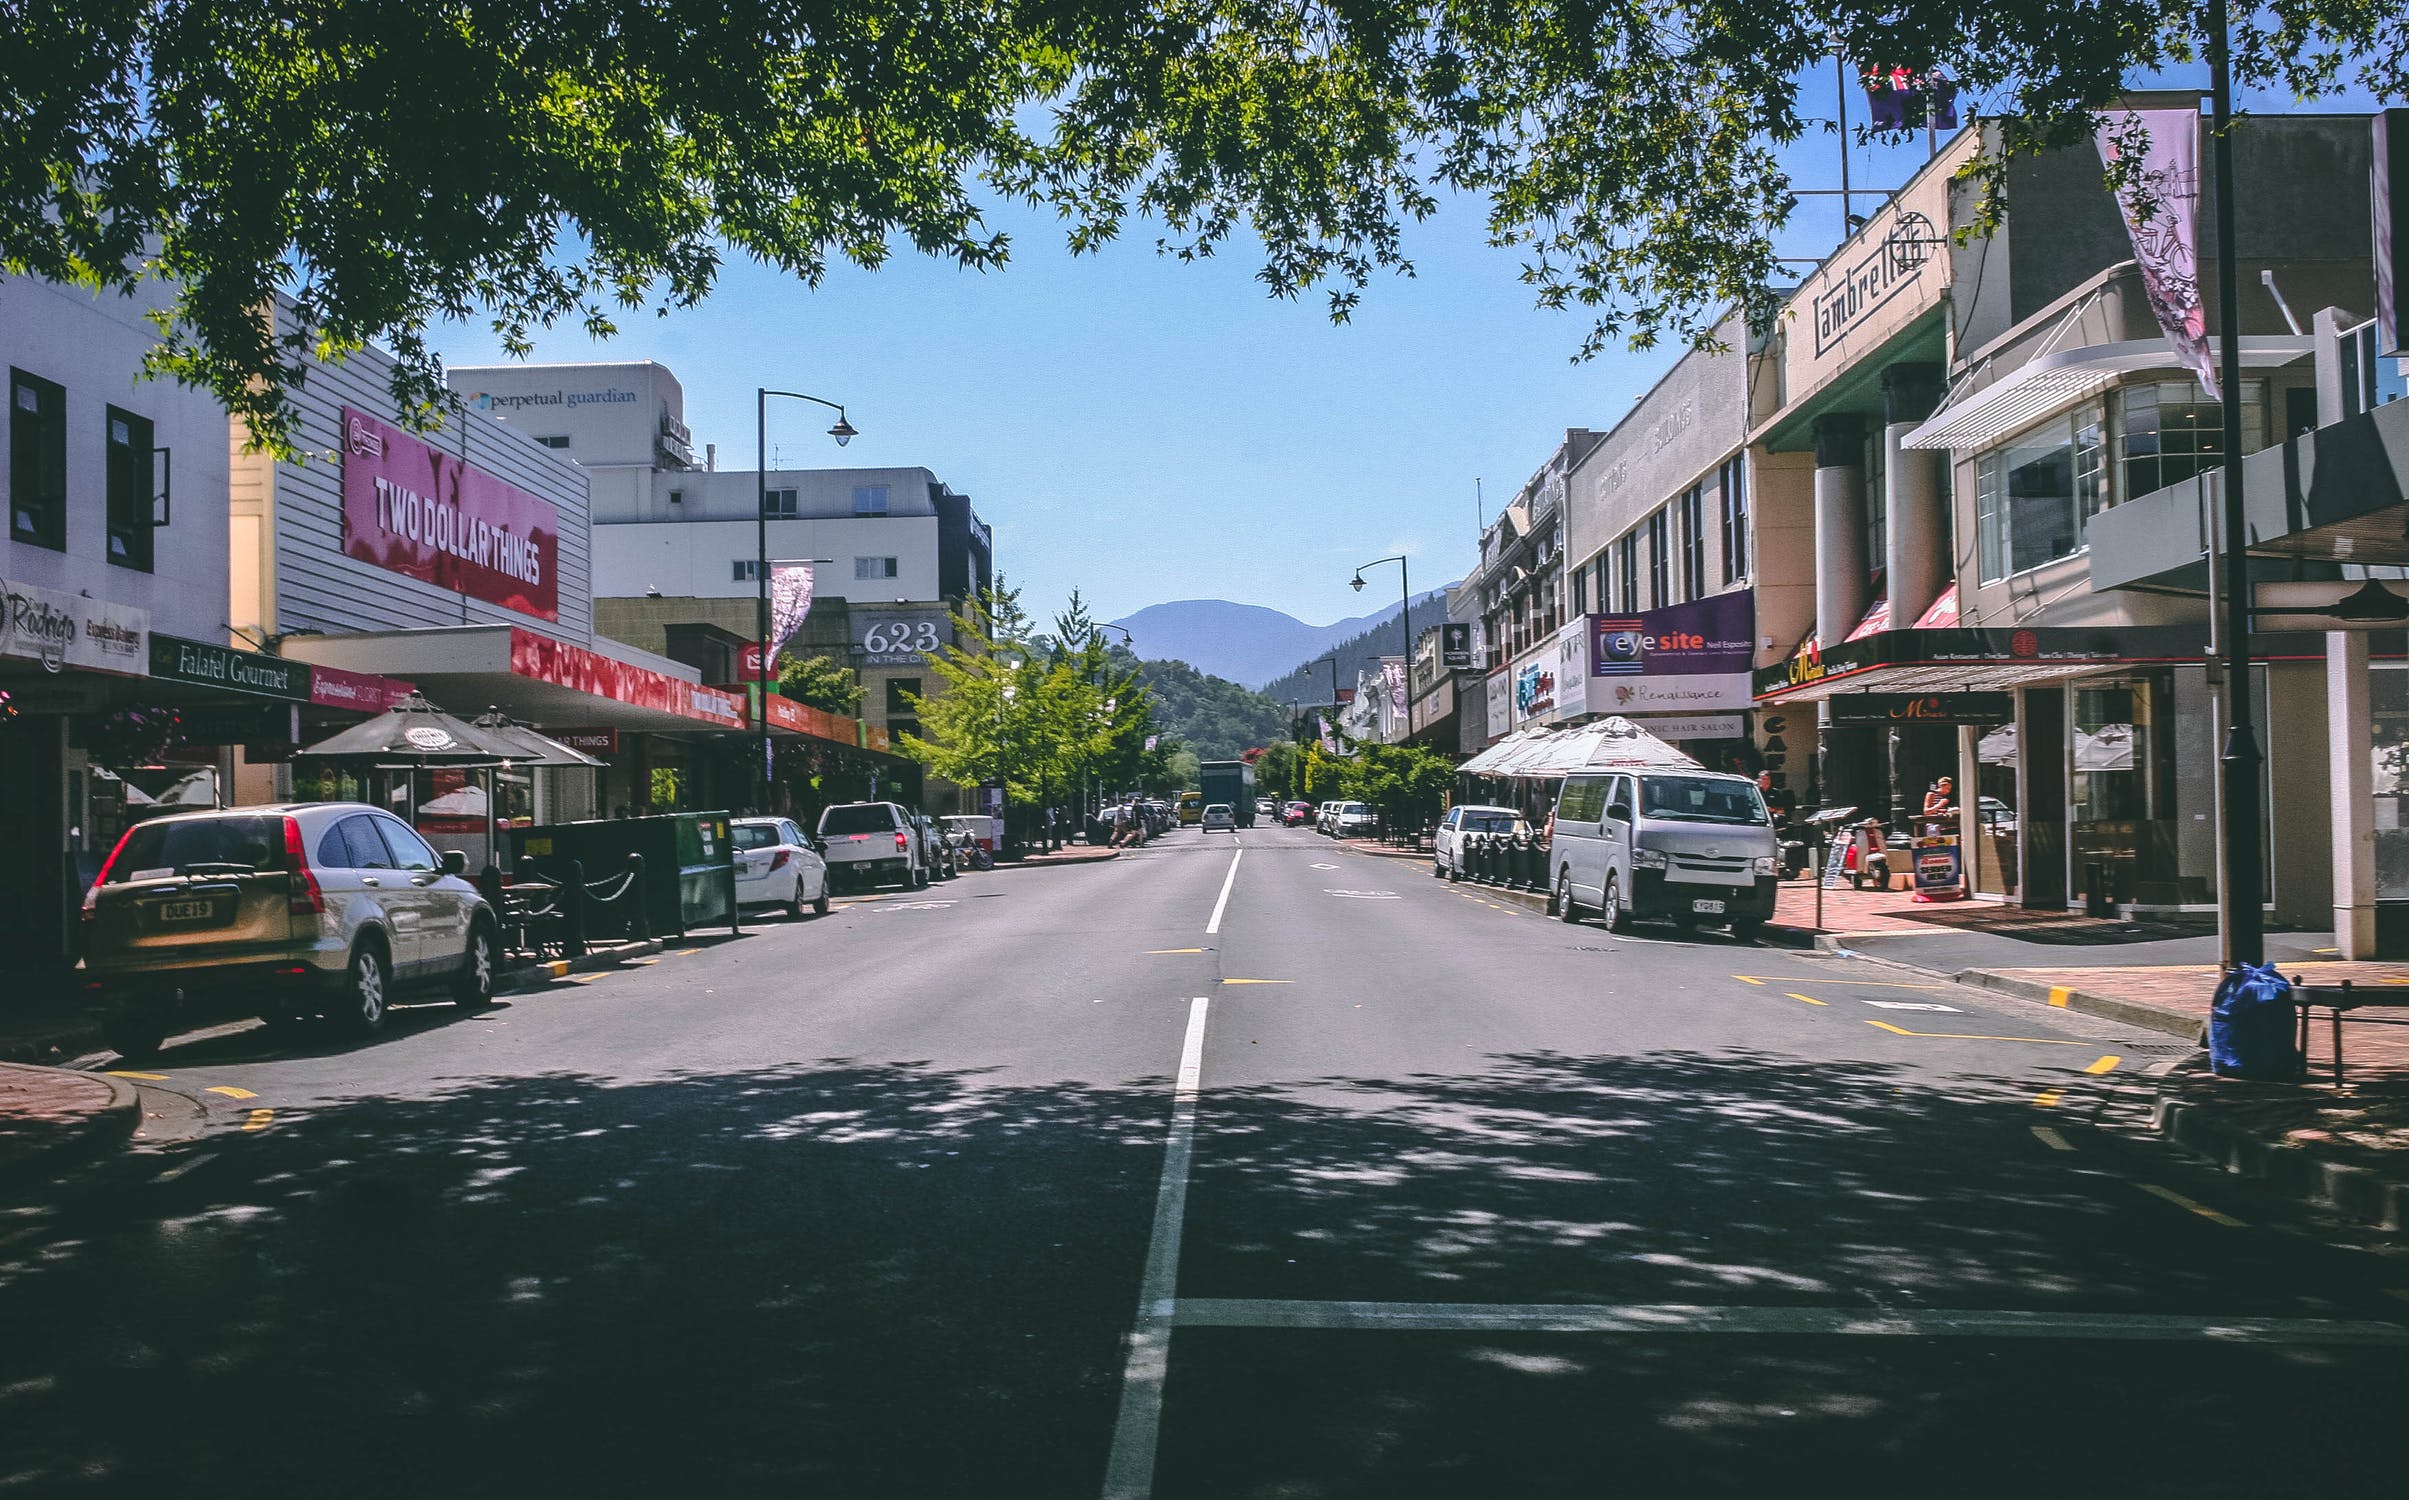 Julia took Lacy shopping in her little town | Source: Pexels